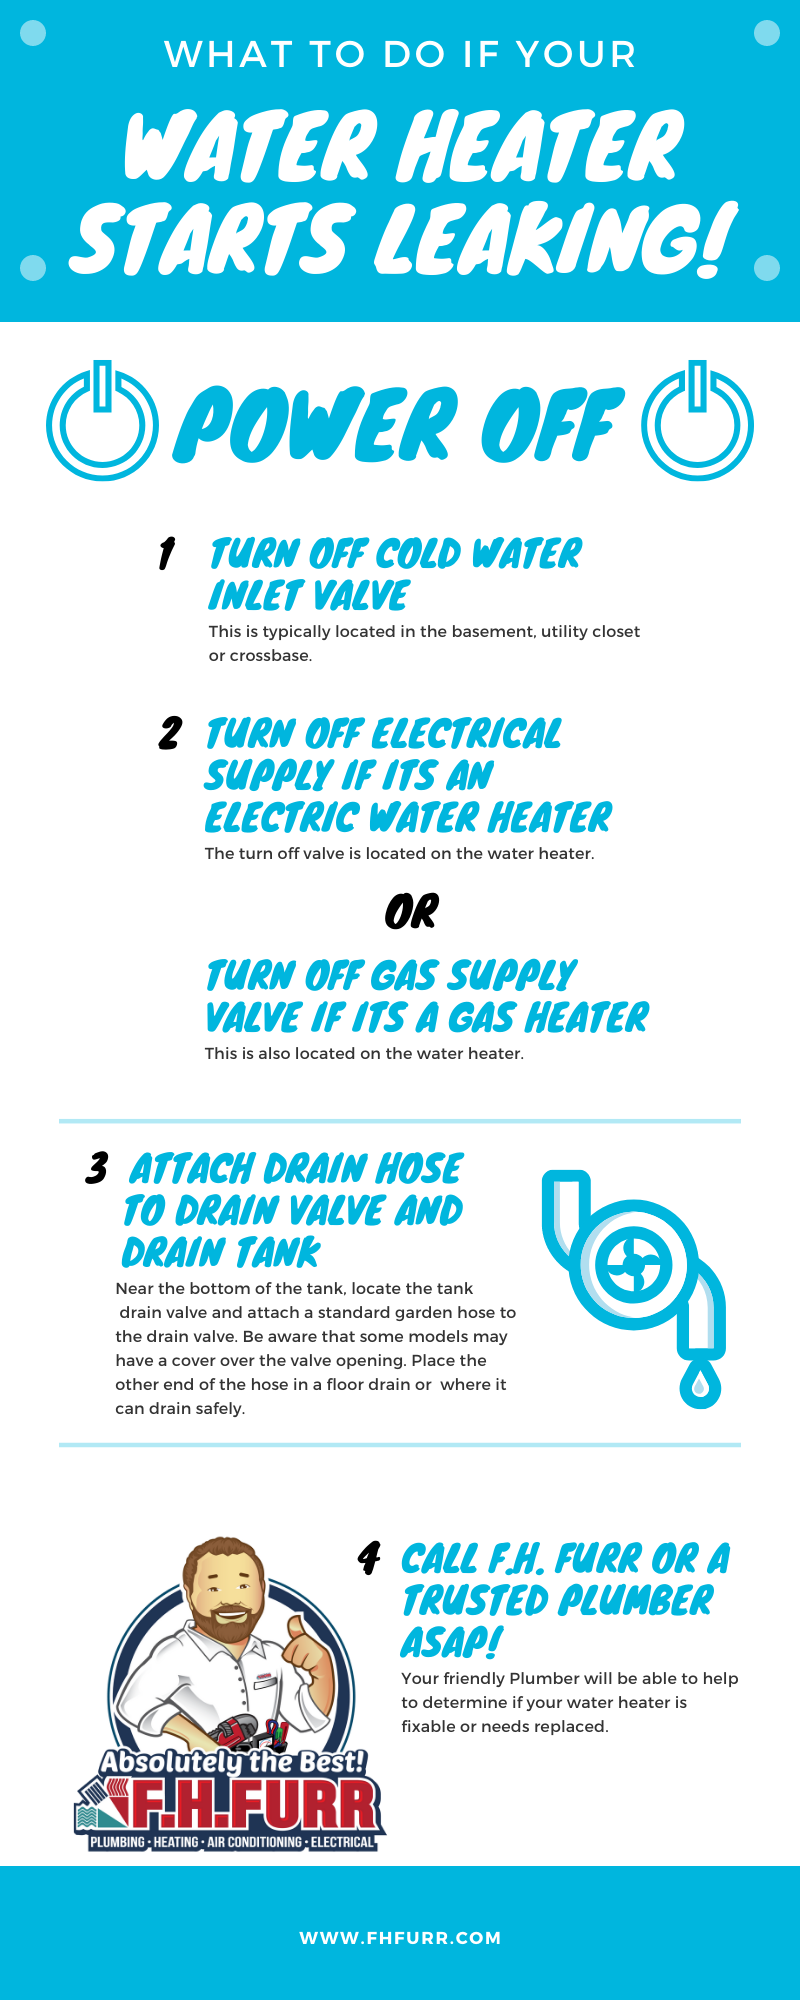 Infographic with steps to follow if your water heater is leaking. Tips read as follows" Step 1. Turn Off Cold Water Inlet Valve  Step 2: Turn Off Electrical Supply If Its An Electric Water Heater  OR: Turn Off Gas Supply Valve If Its A Gas Heater  Step 3: Attach Drain Hose To Drain Valve & Drain Tank  Step 4: Call F.H. Furr ASAP Or A Trusted Plumber!"